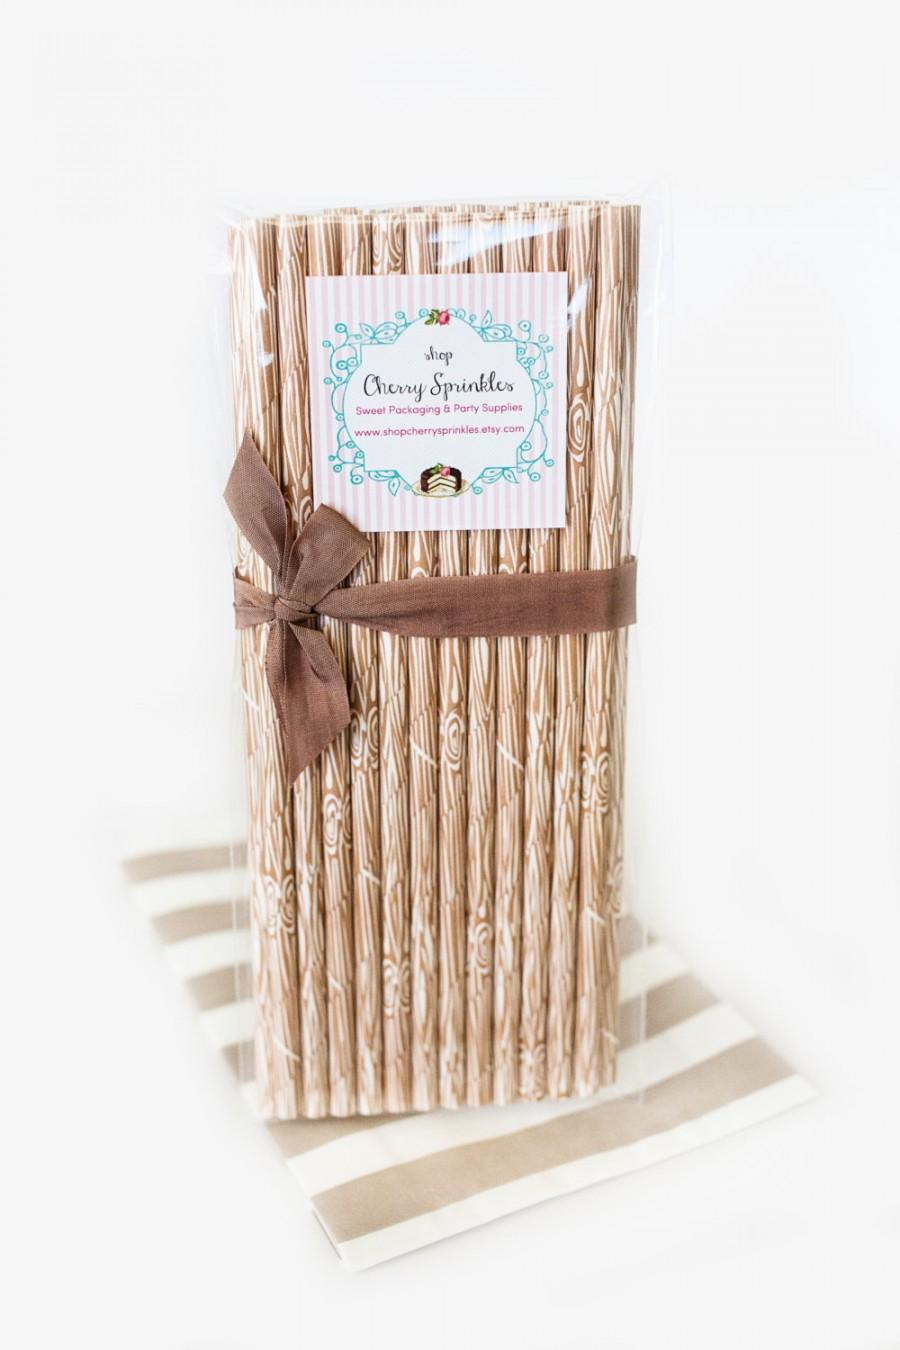 Mariage - Lumberjack party - Wood Grain paper straws - Woodland party - Rustic Wedding Decor - Cake Pops - Party Decor - Woodland Decor - Brown Straws